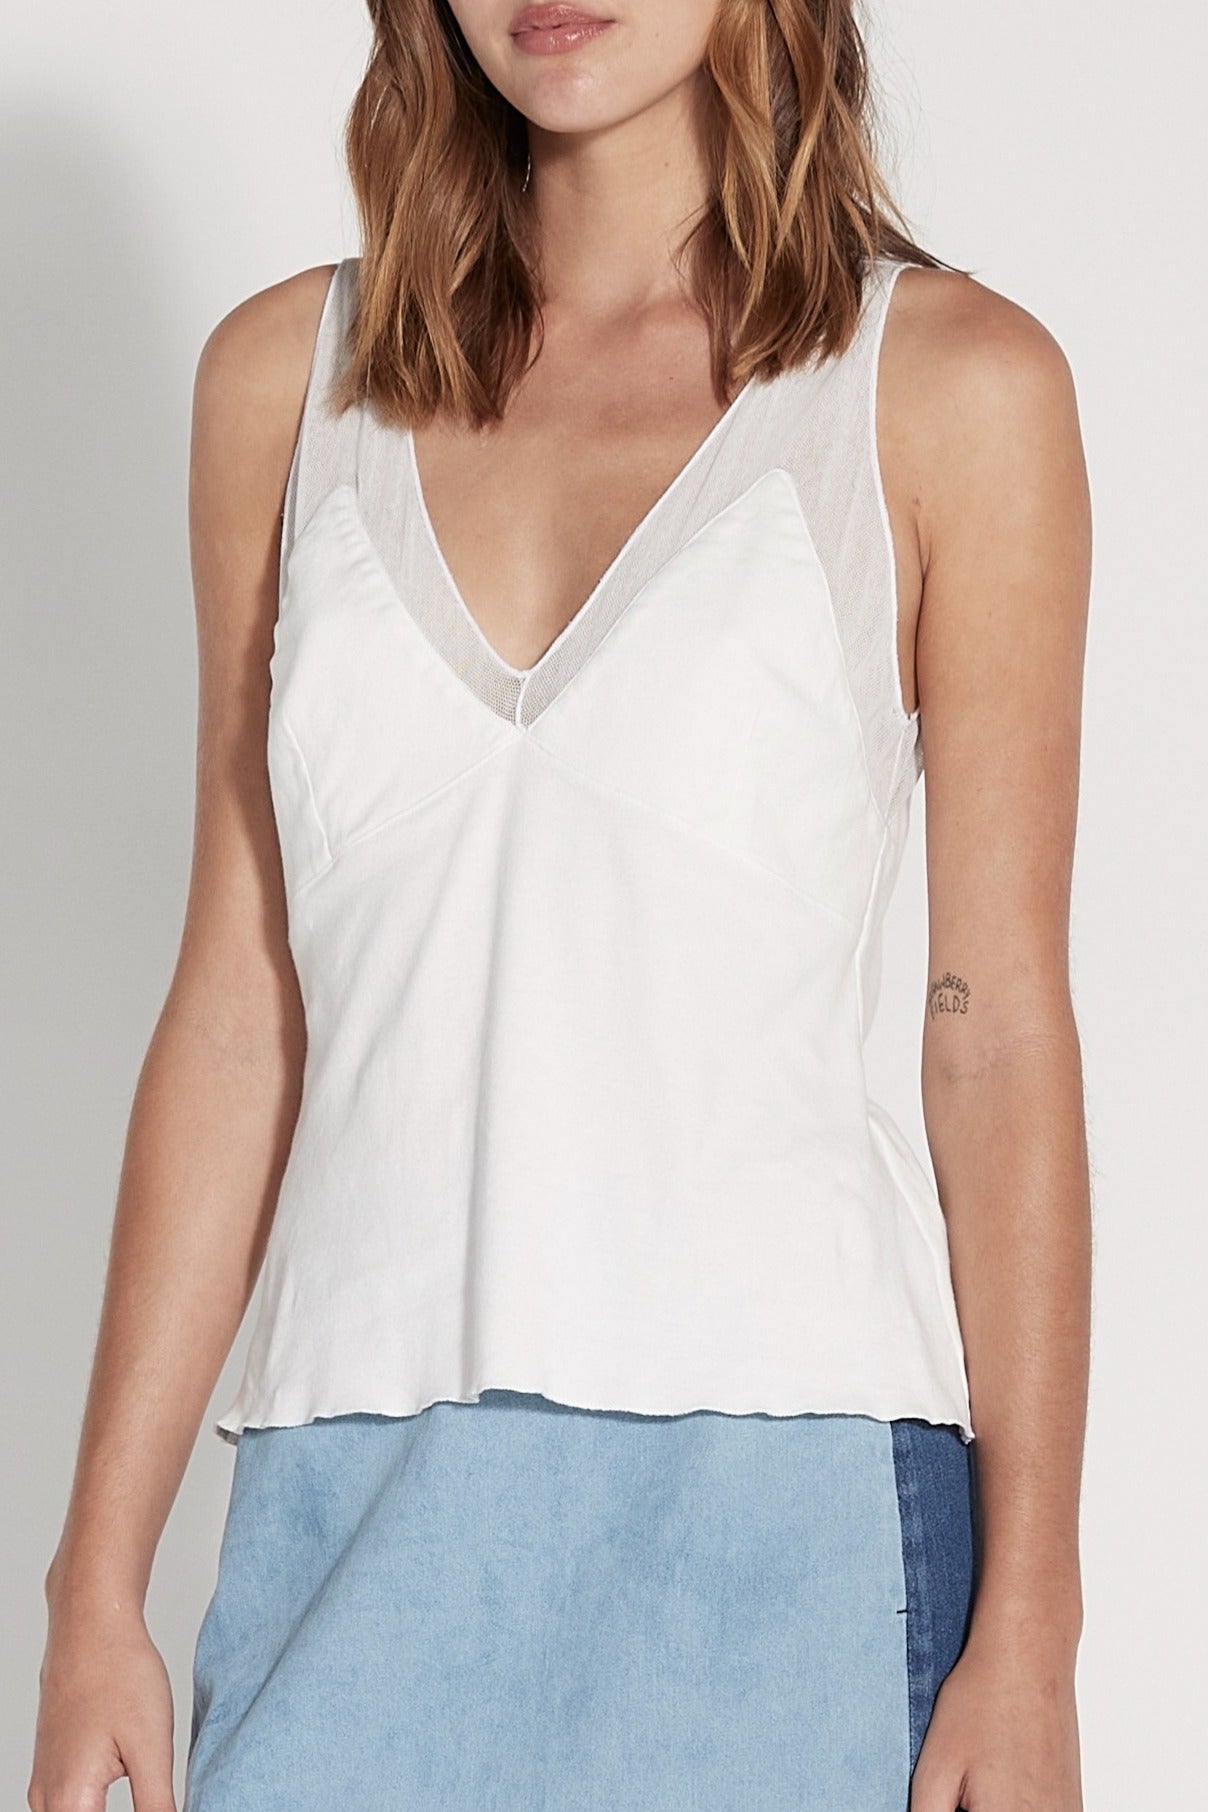 Washed White Cotton Mesh Poppy Tank Front Close-Up View